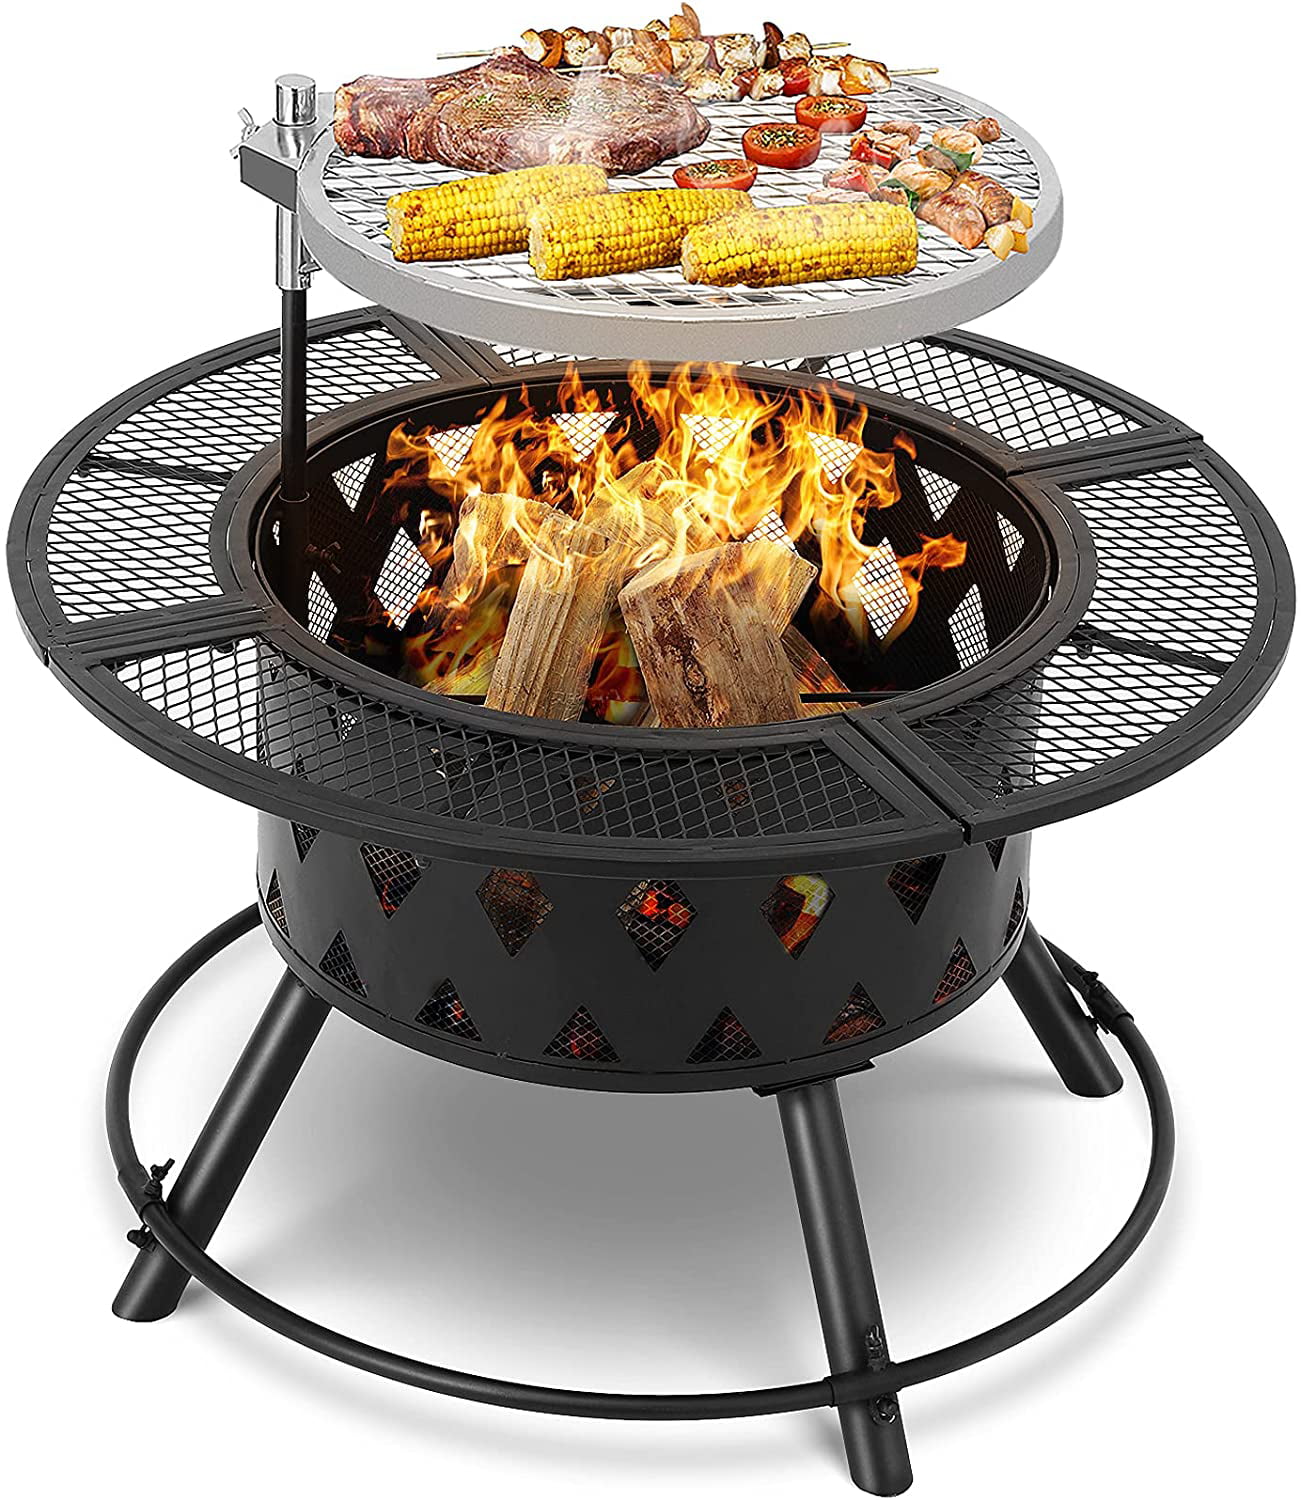 Outdoor Wood Burning Fire Pit, Open Fire Pit Grill